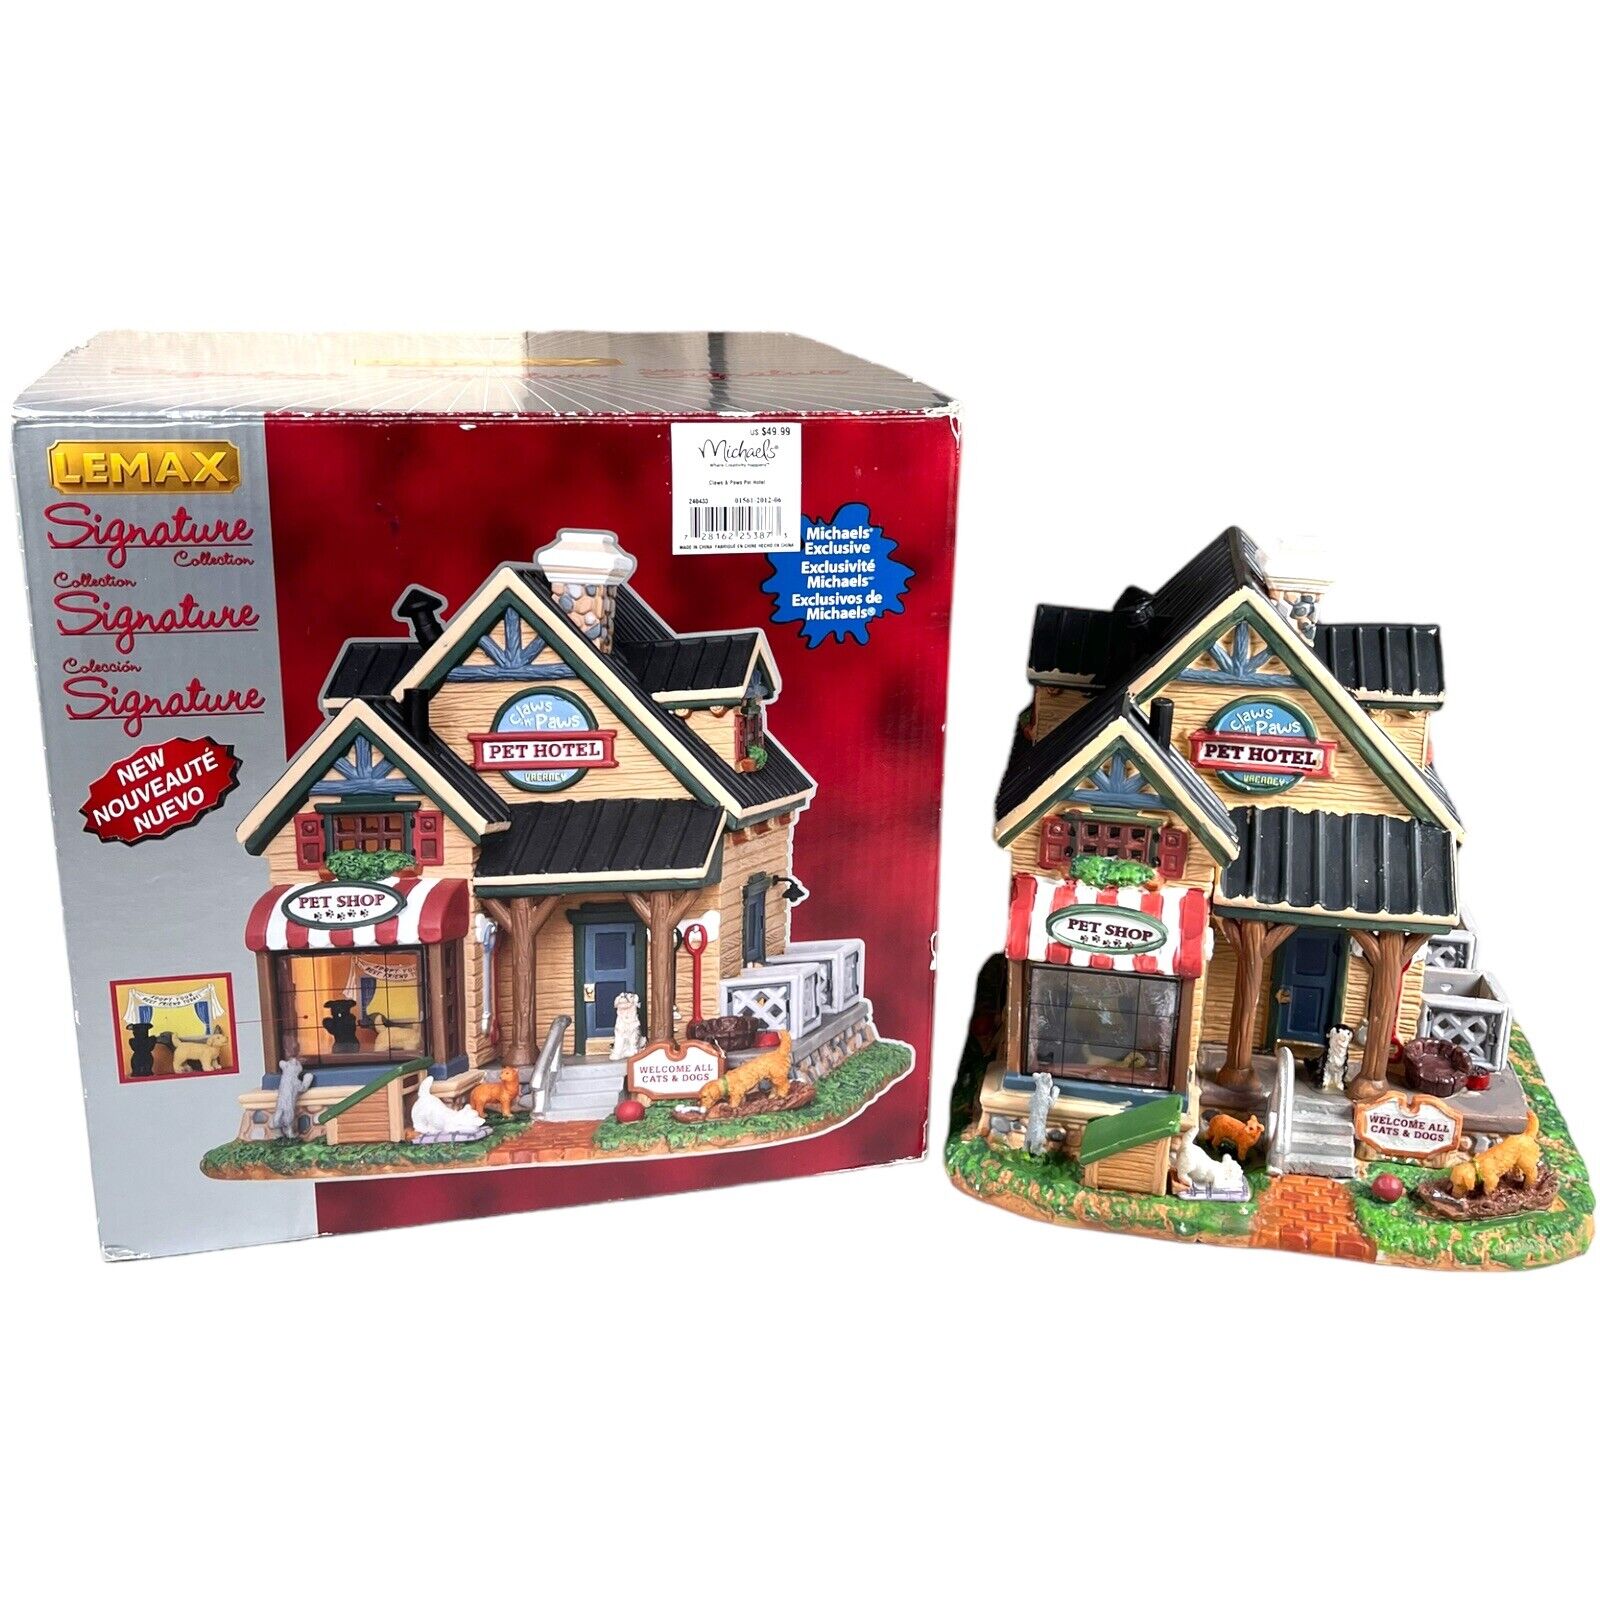 Lemax Christmas Village Claws & Paws Pet Hotel 2012 Porcelain Lighted Building